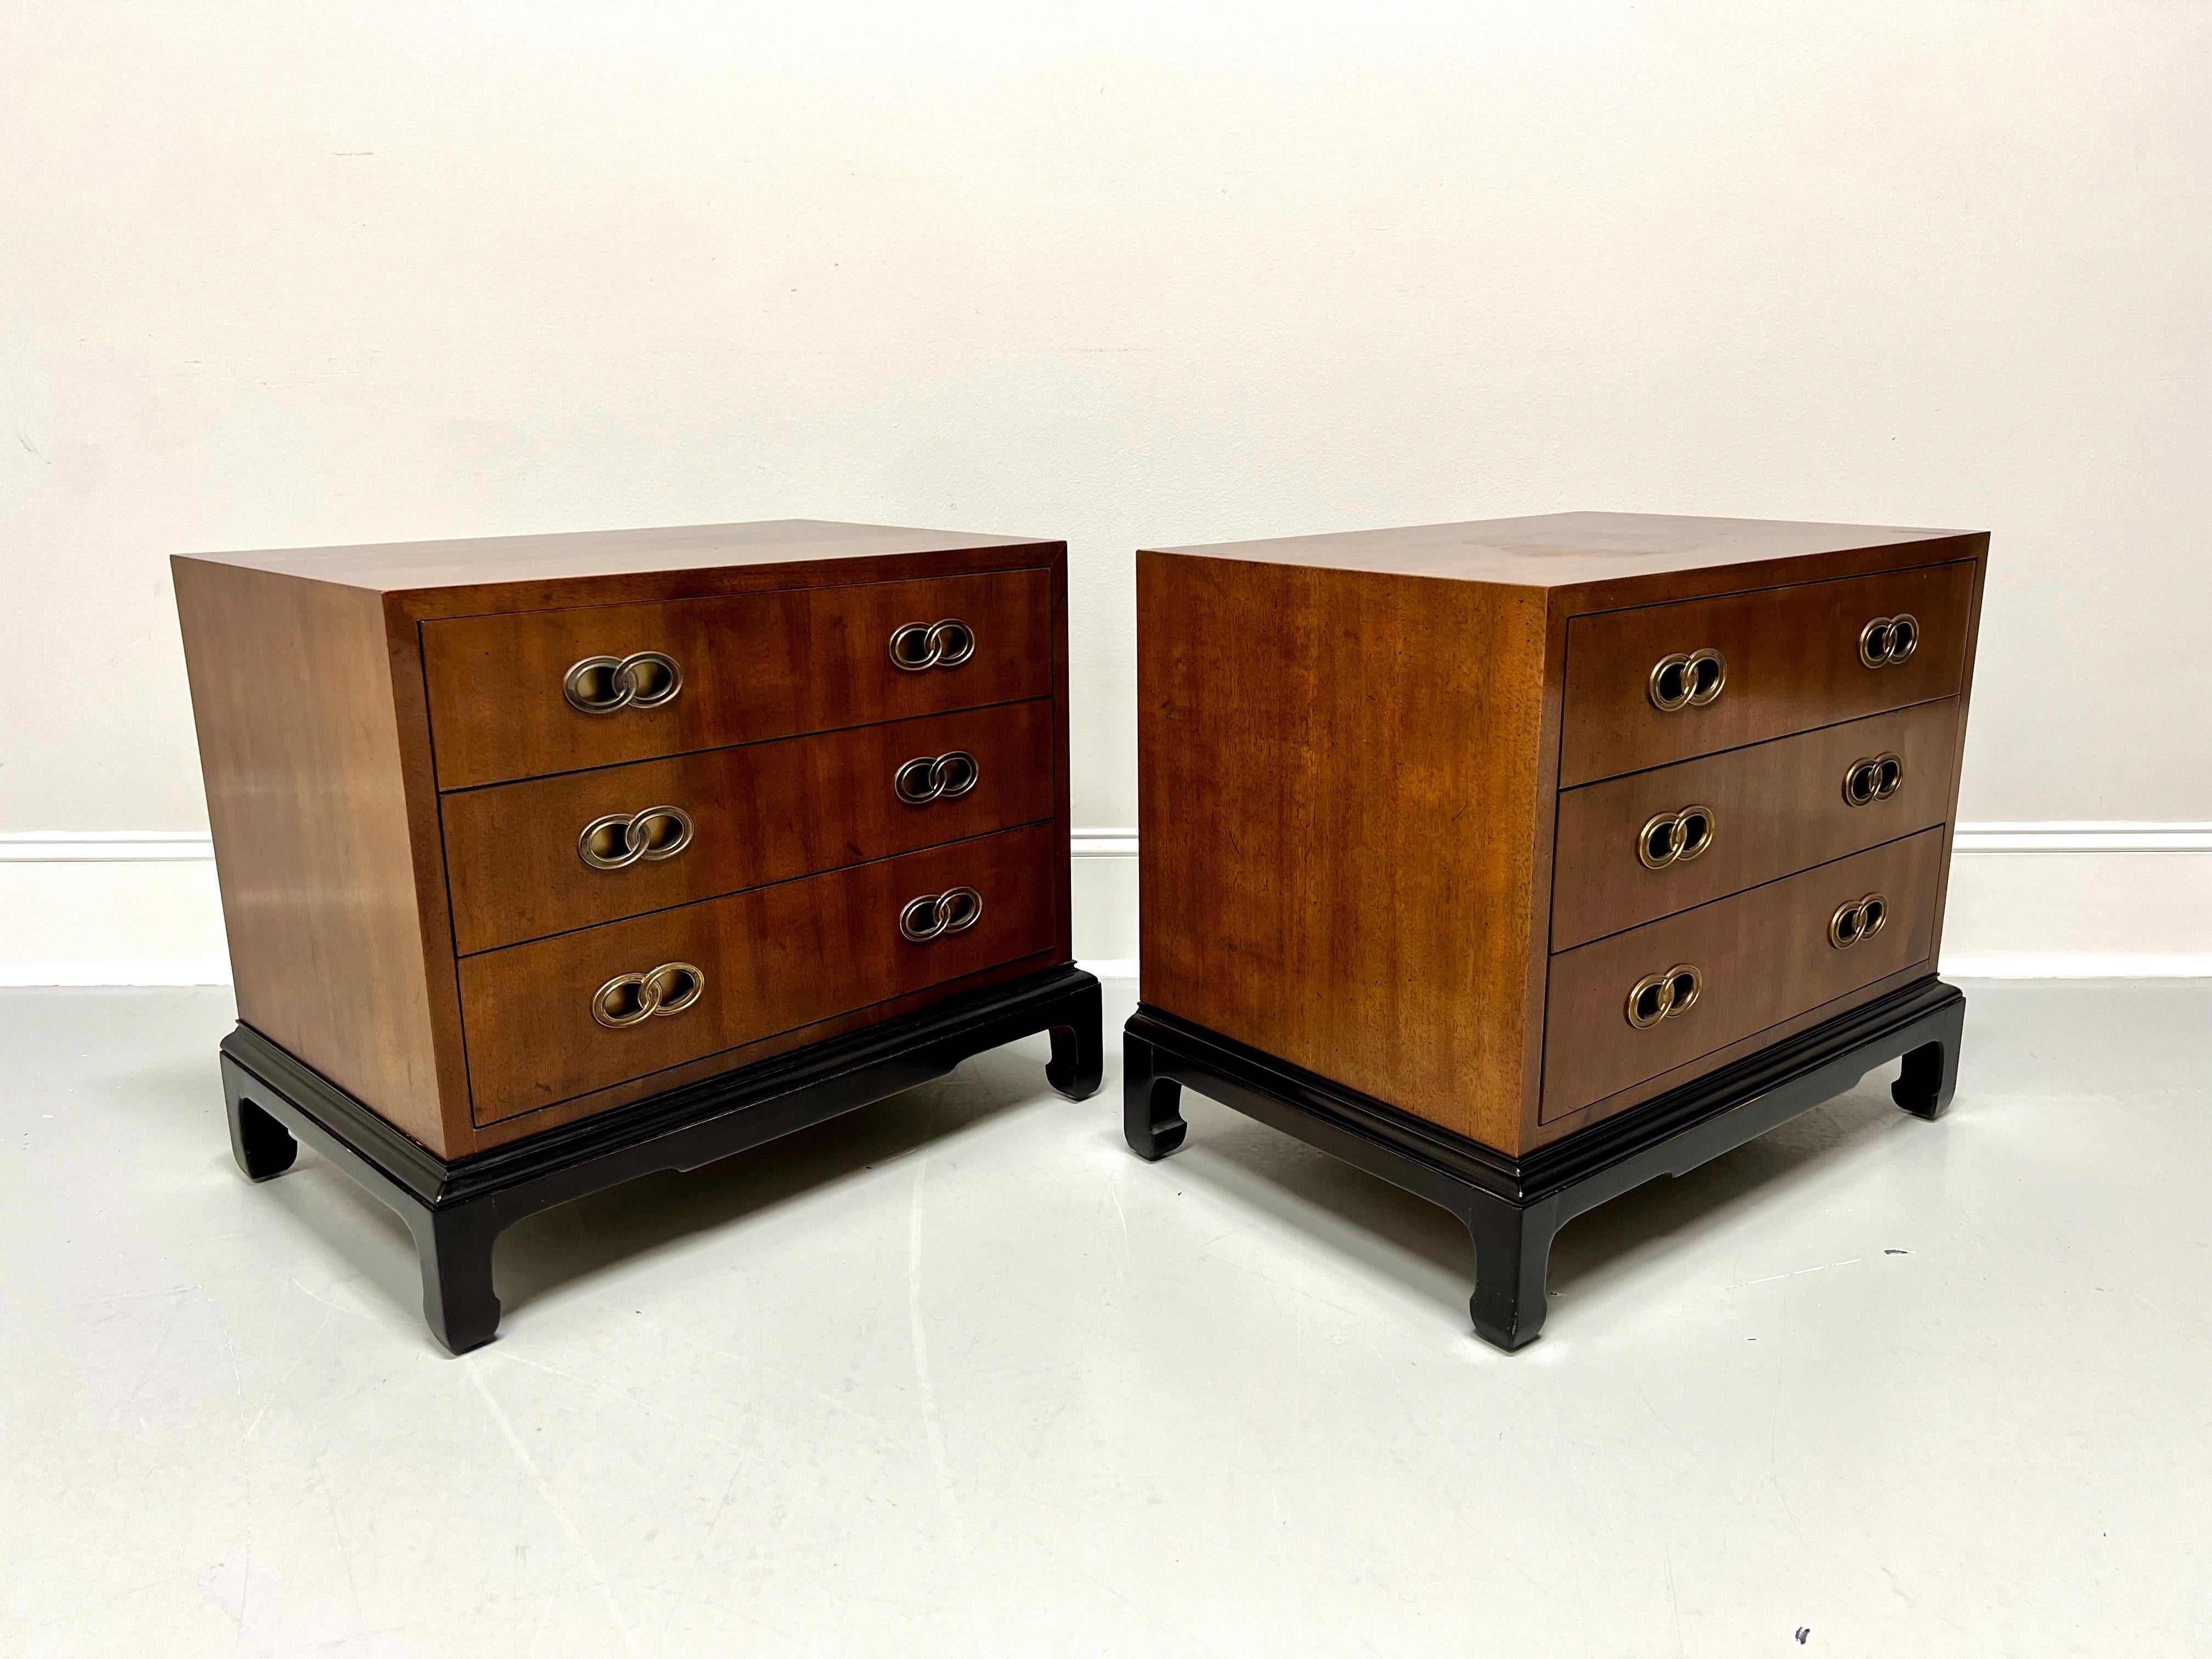 A pair of Asian inspired nightstands designed by Michael Taylor for Henredon. Mahogany with a slightly distressed finish, decorative brass hardware, square edge to top, Ming design black lacquered base with curved inward square legs. Features three